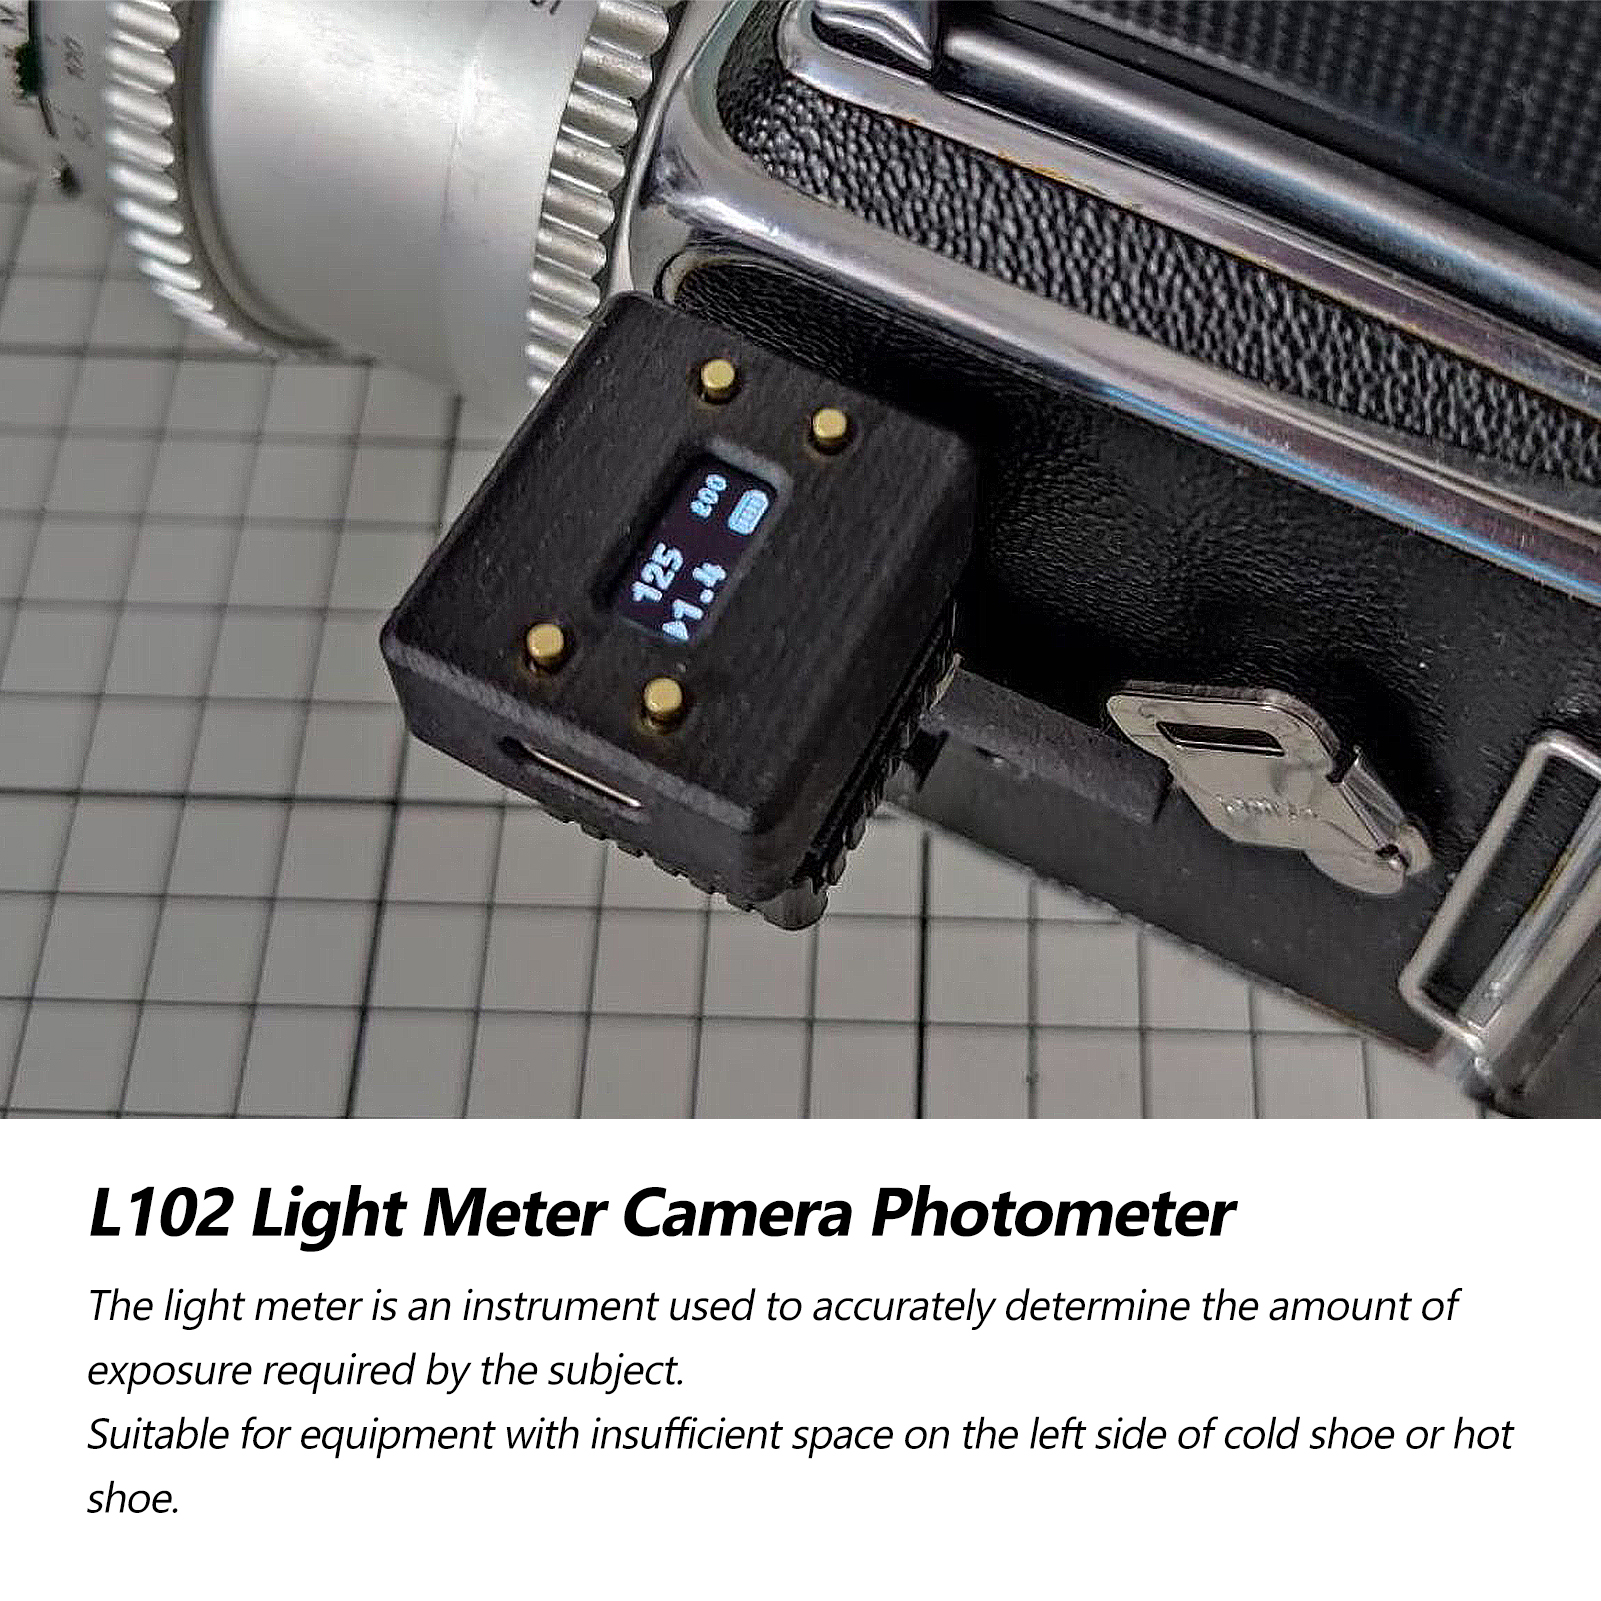 HY-L102-Photometer-Light-Meter-for-Camera-Top-Reflection-HotCold-Shoe-Fixing-Camera-1882497-1